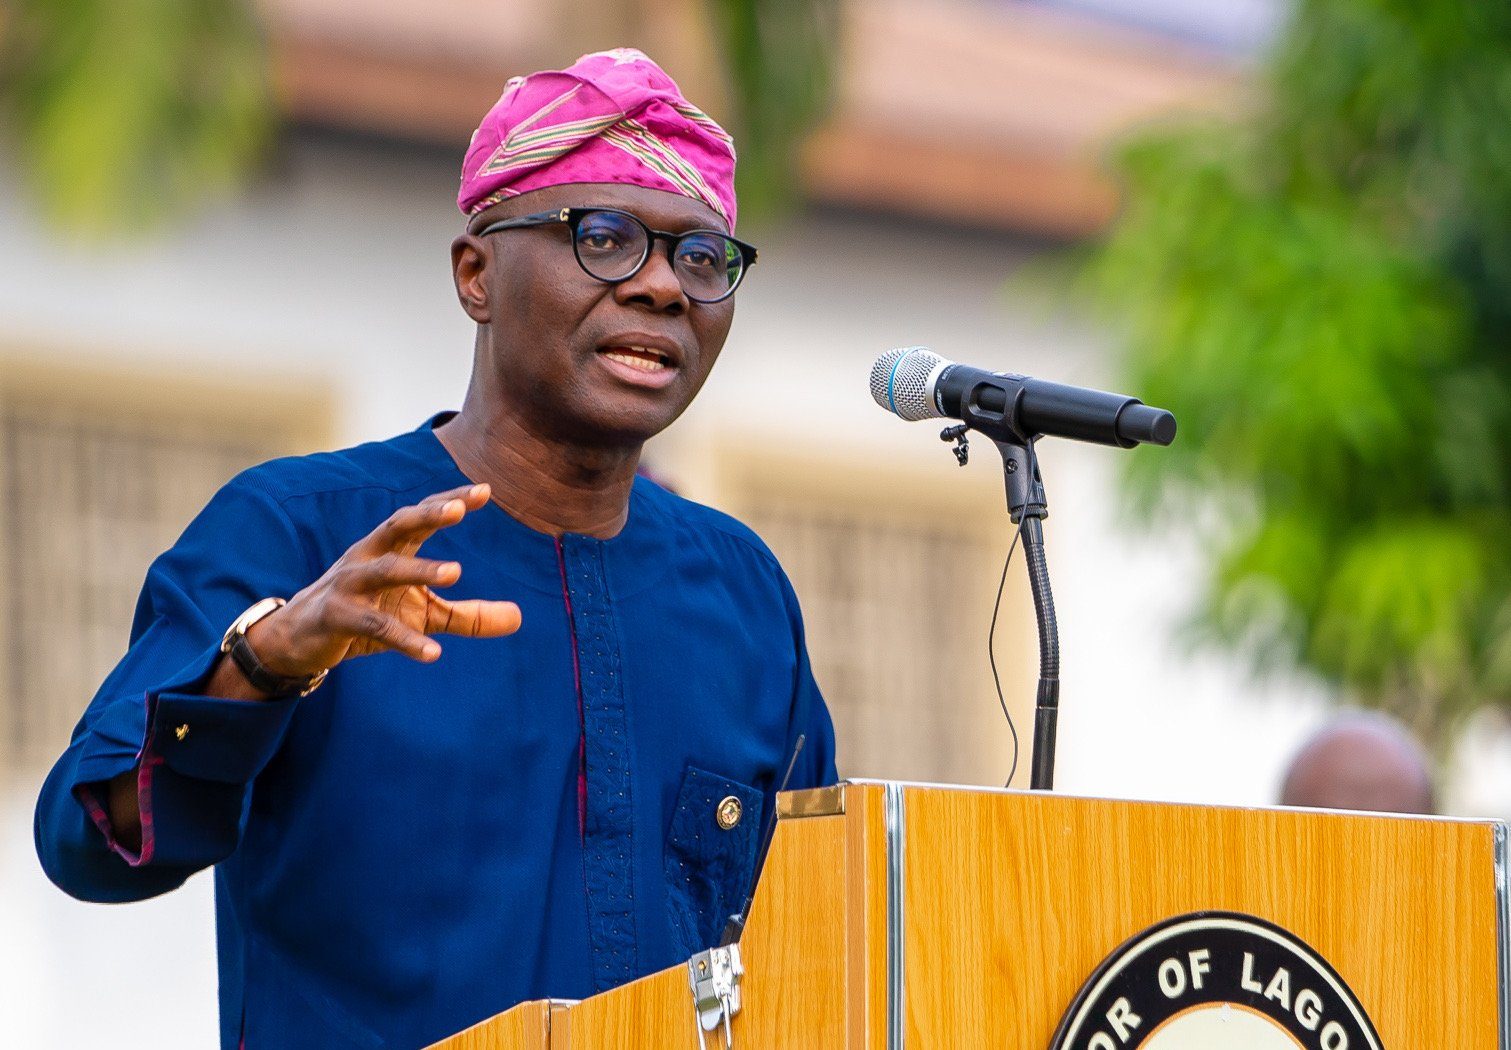 Sanwo-Olu to react to Army statement later, Govt source assures